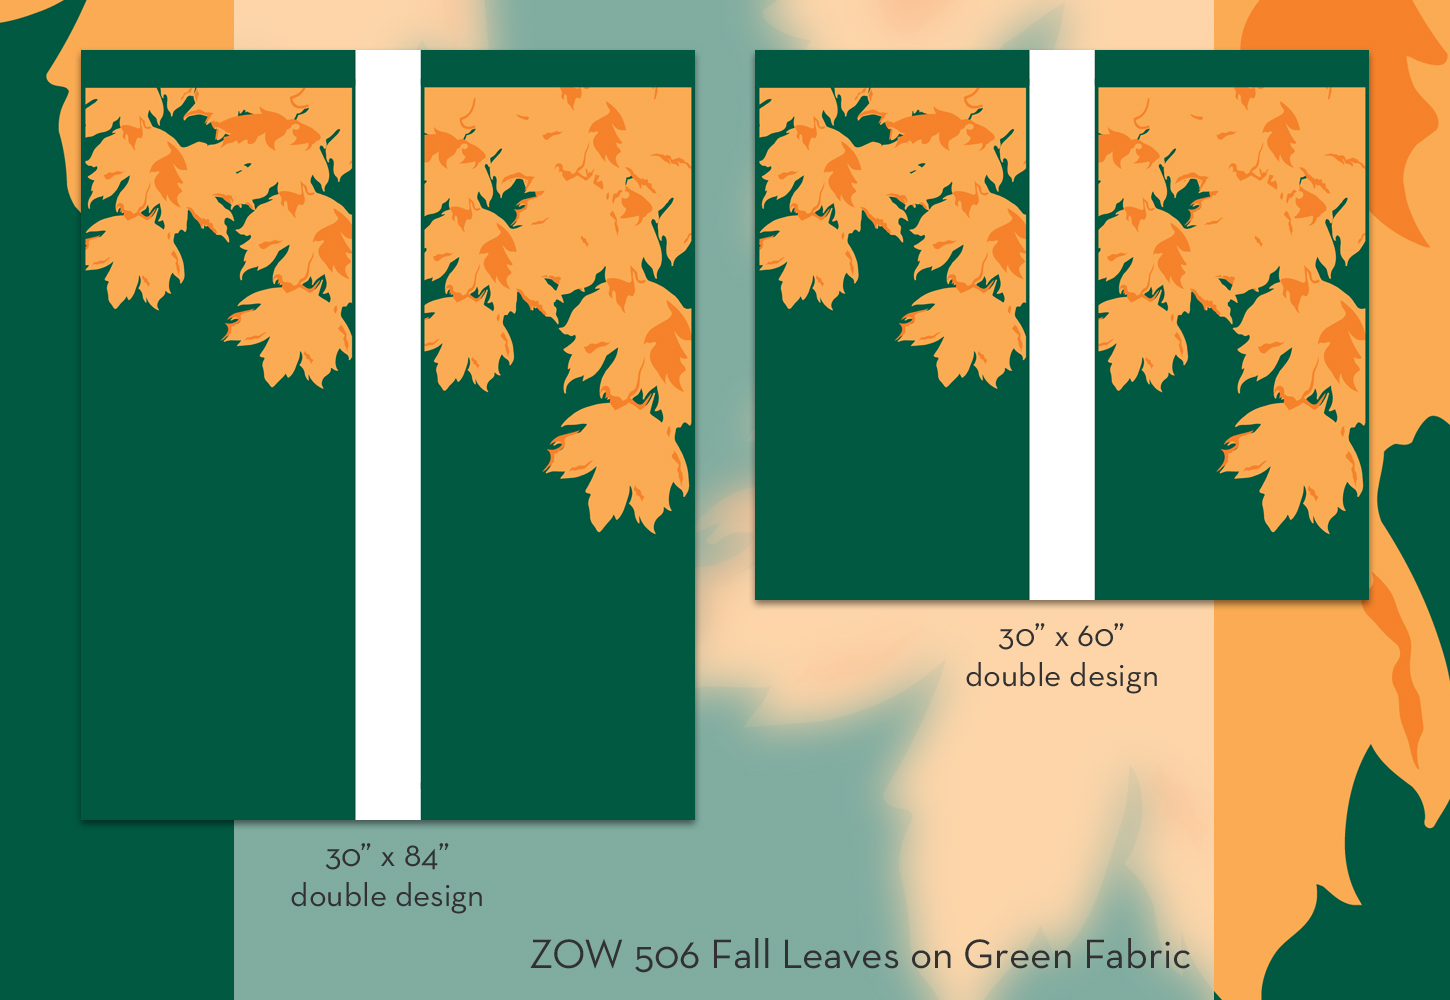 ZOW 506 Fall Leaves on Green Fabric